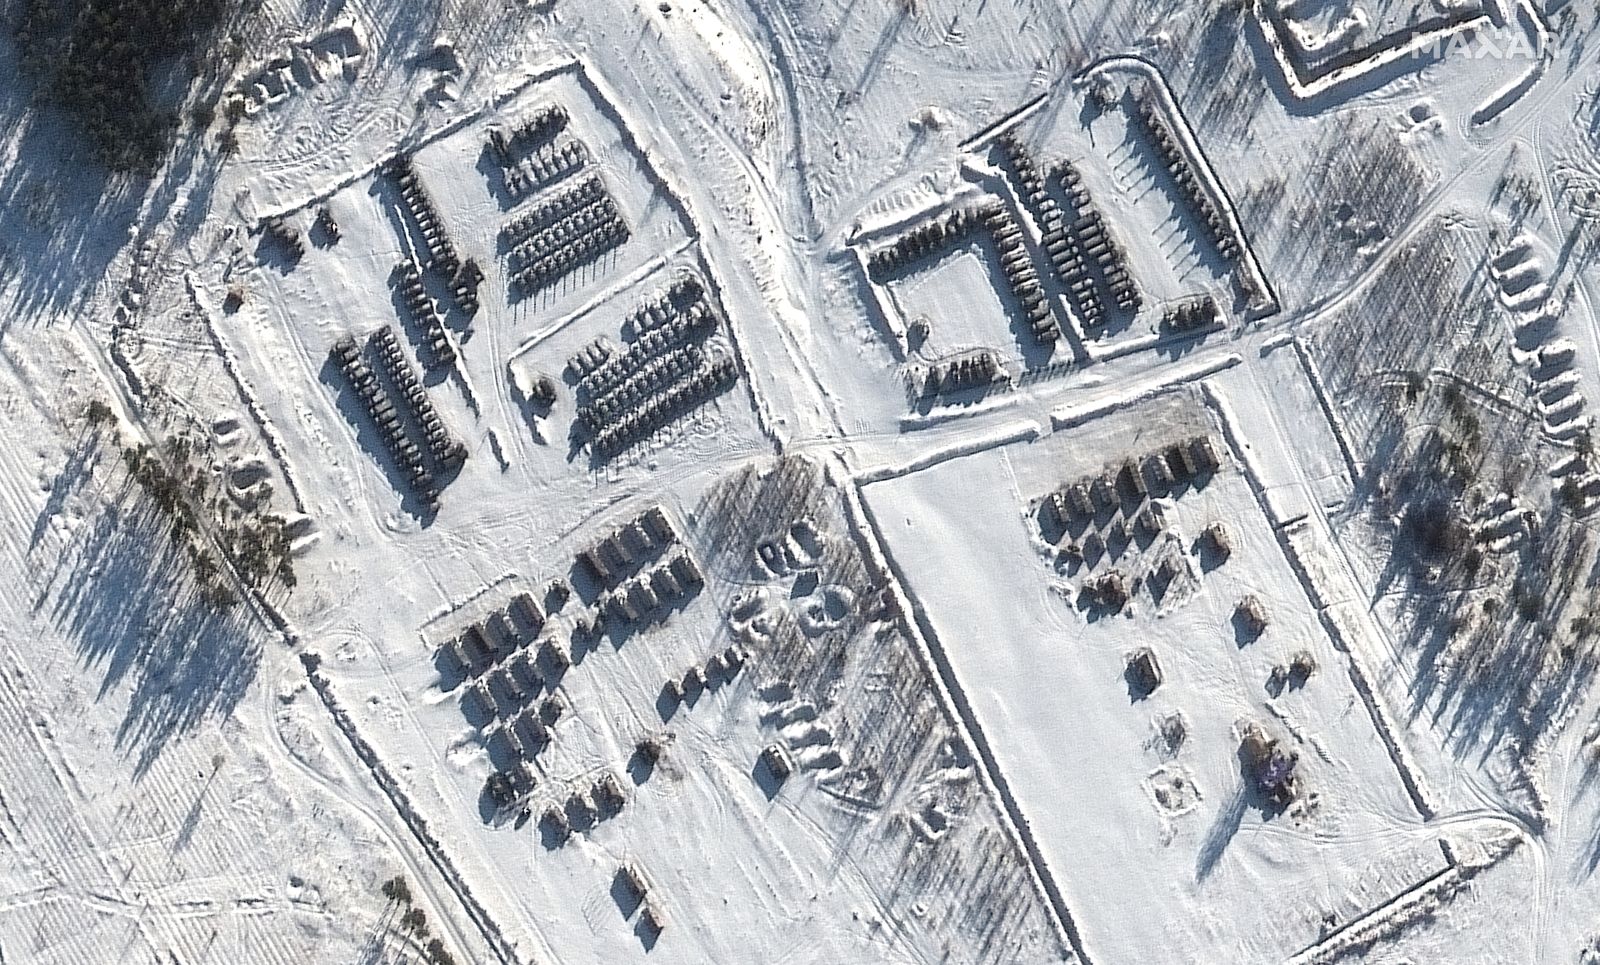 epa09696330 A handout satellite image made available by Maxar Technologies shows a battle group at Pogonovo training area in Voronezh, Russia, 19 January 2022. Tensioins between Russia and Ukraine are at their highest in many years, as Russian troop build-up near the two nations borders raise fears that Russia could launch an invasion.  EPA/MAXAR TECHNOLOGIES HANDOUT -- MANDATORY CREDIT: SATELLITE IMAGE 2021 MAXAR TECHNOLOGIES -- the watermark may not be removed/cropped -- HANDOUT EDITORIAL USE ONLY/NO SALES